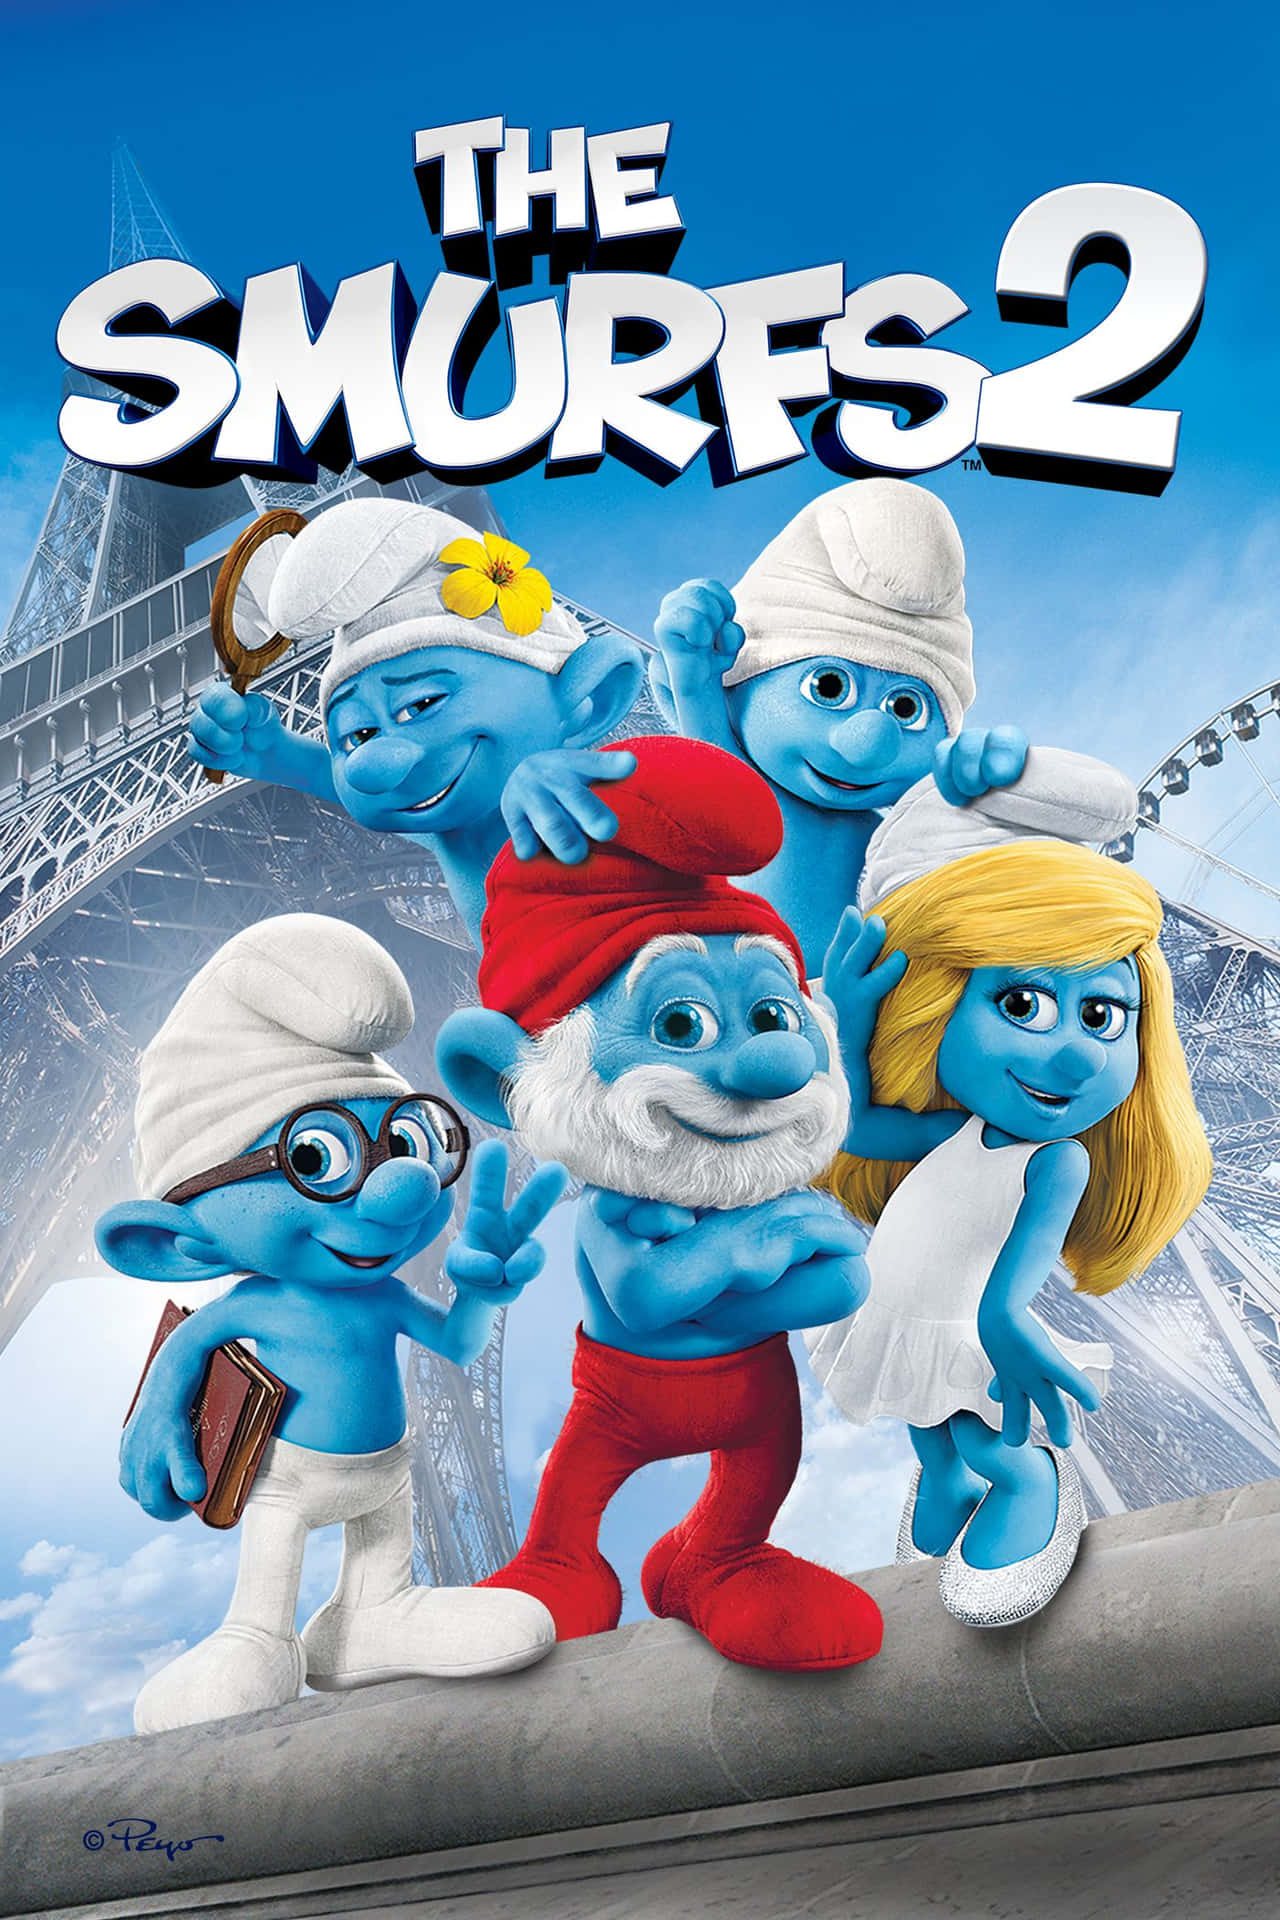 "Life is Smurftacular!"